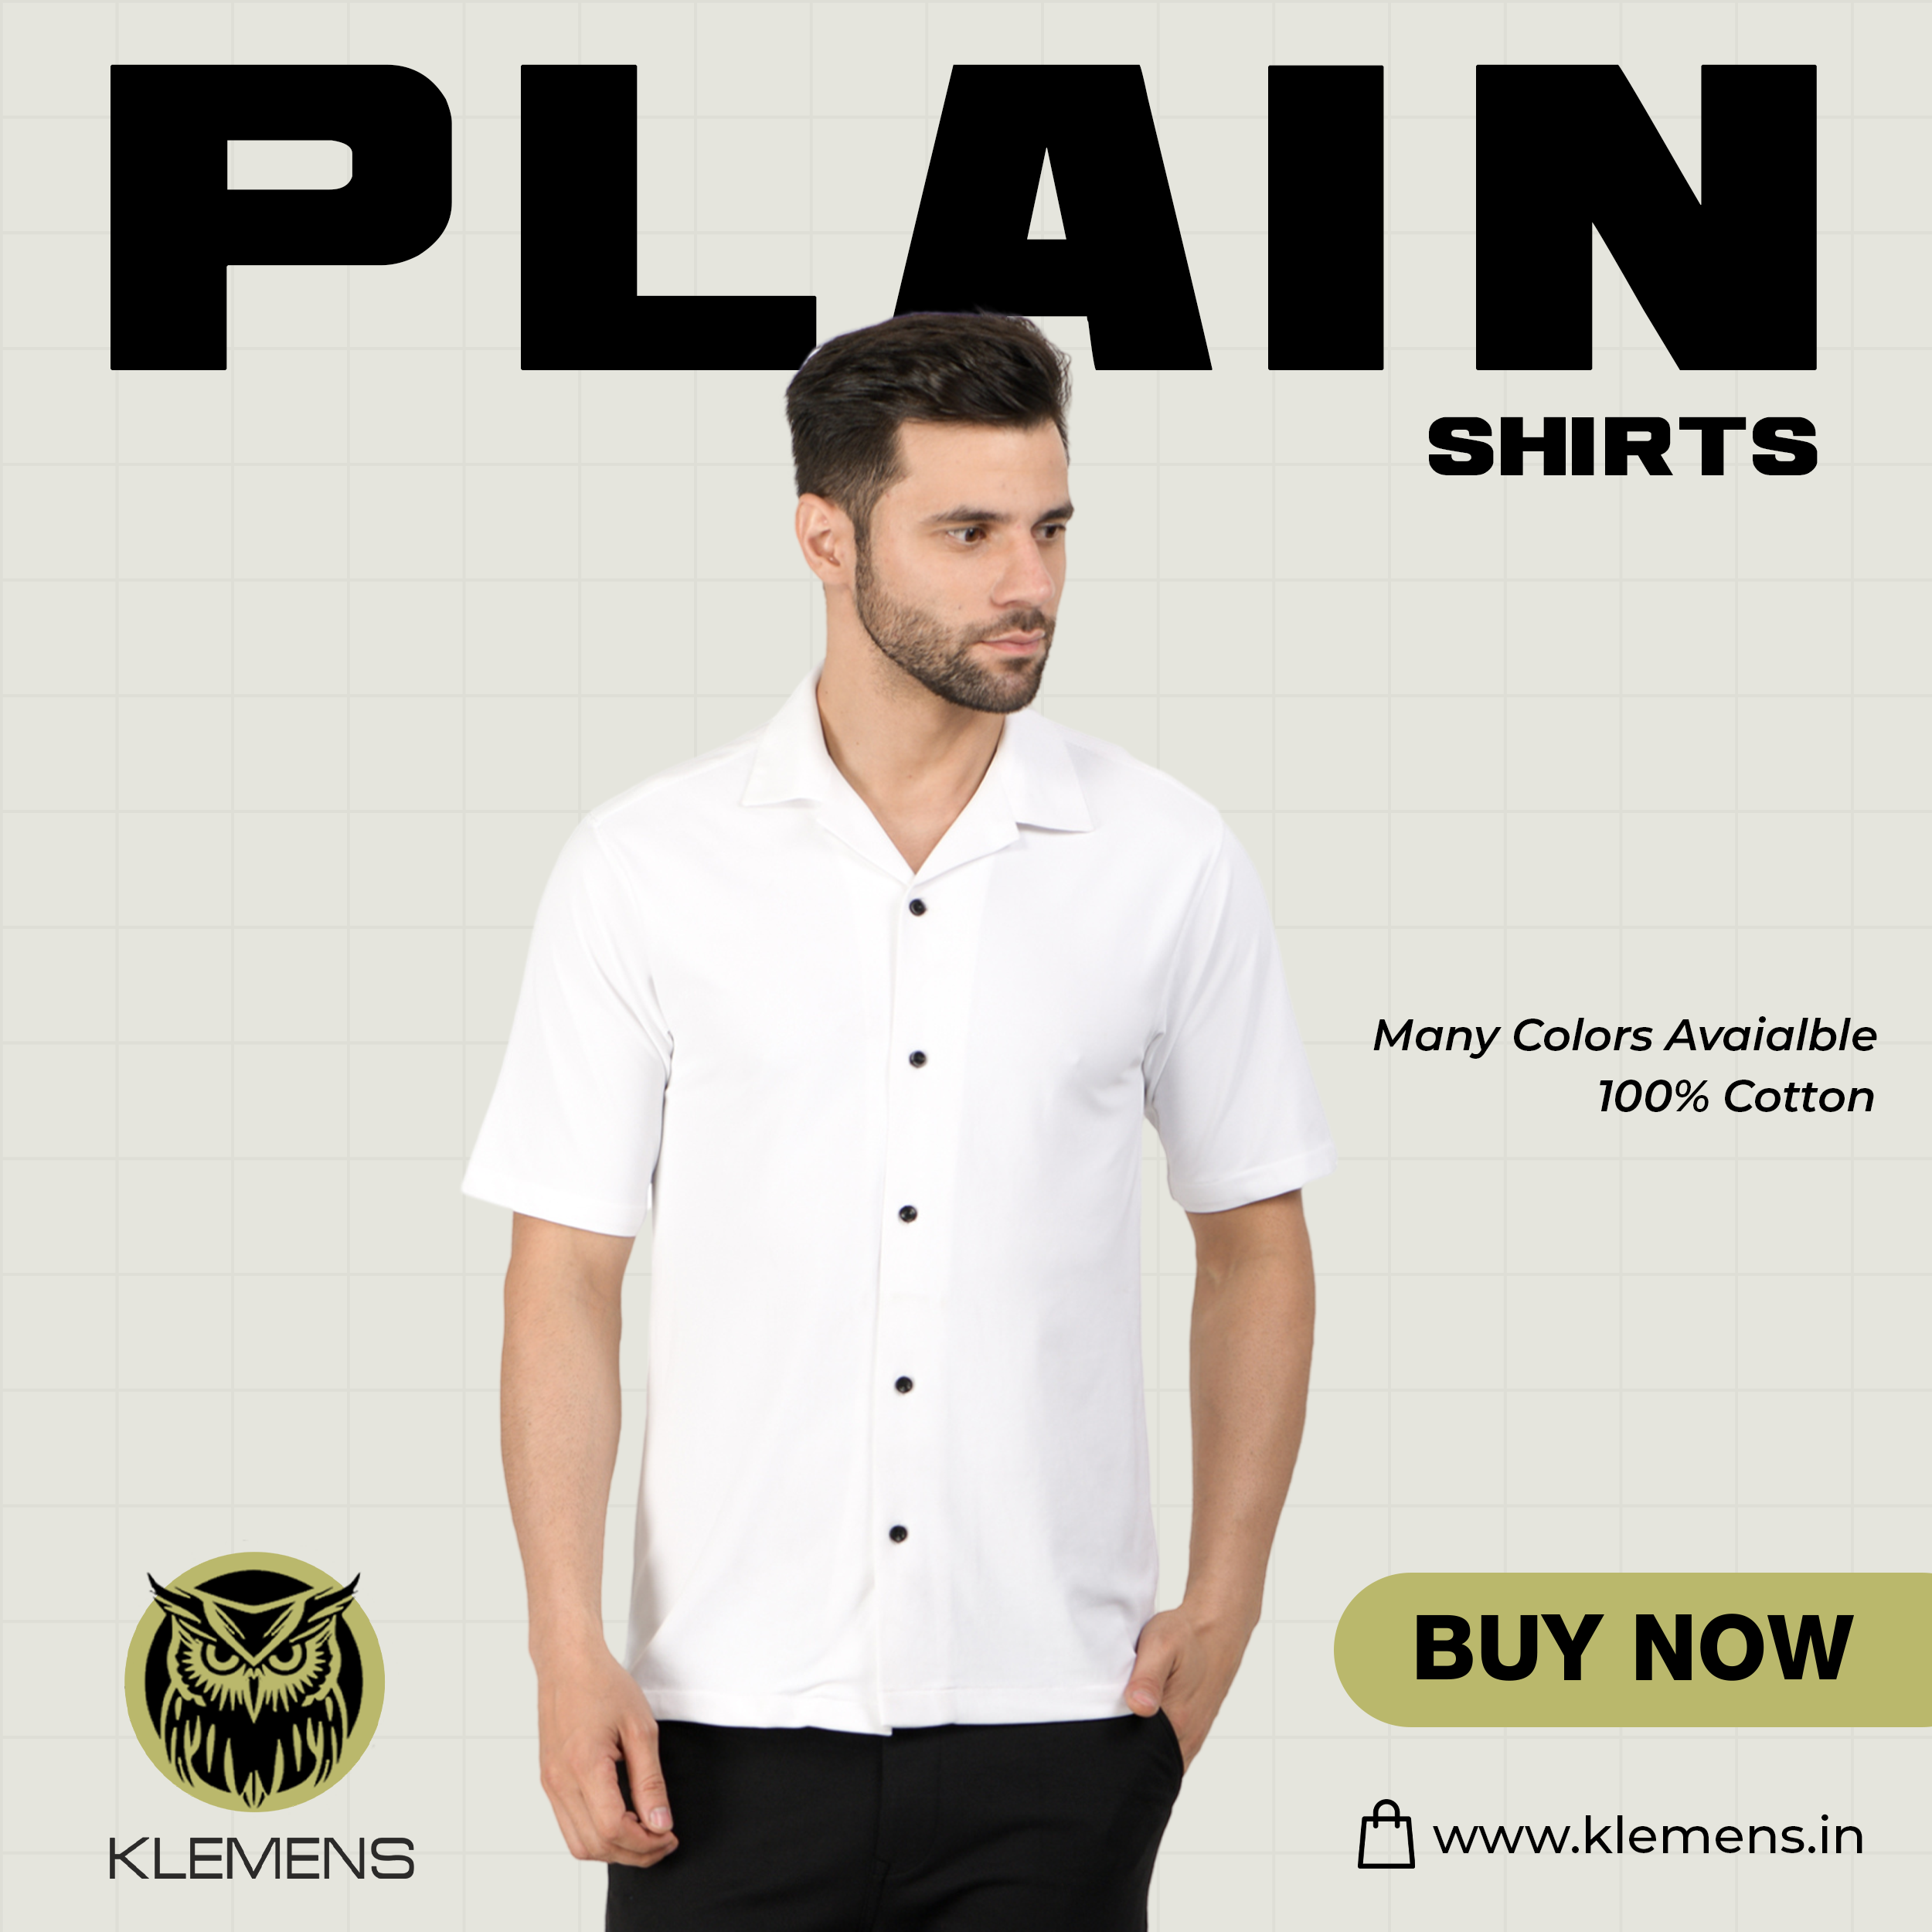 SHIRTS

 

i Many Colors Avaialble
100% Cotton

BUY NOW

NT"
ap
y \! A www.klemens.in

KLEMENS